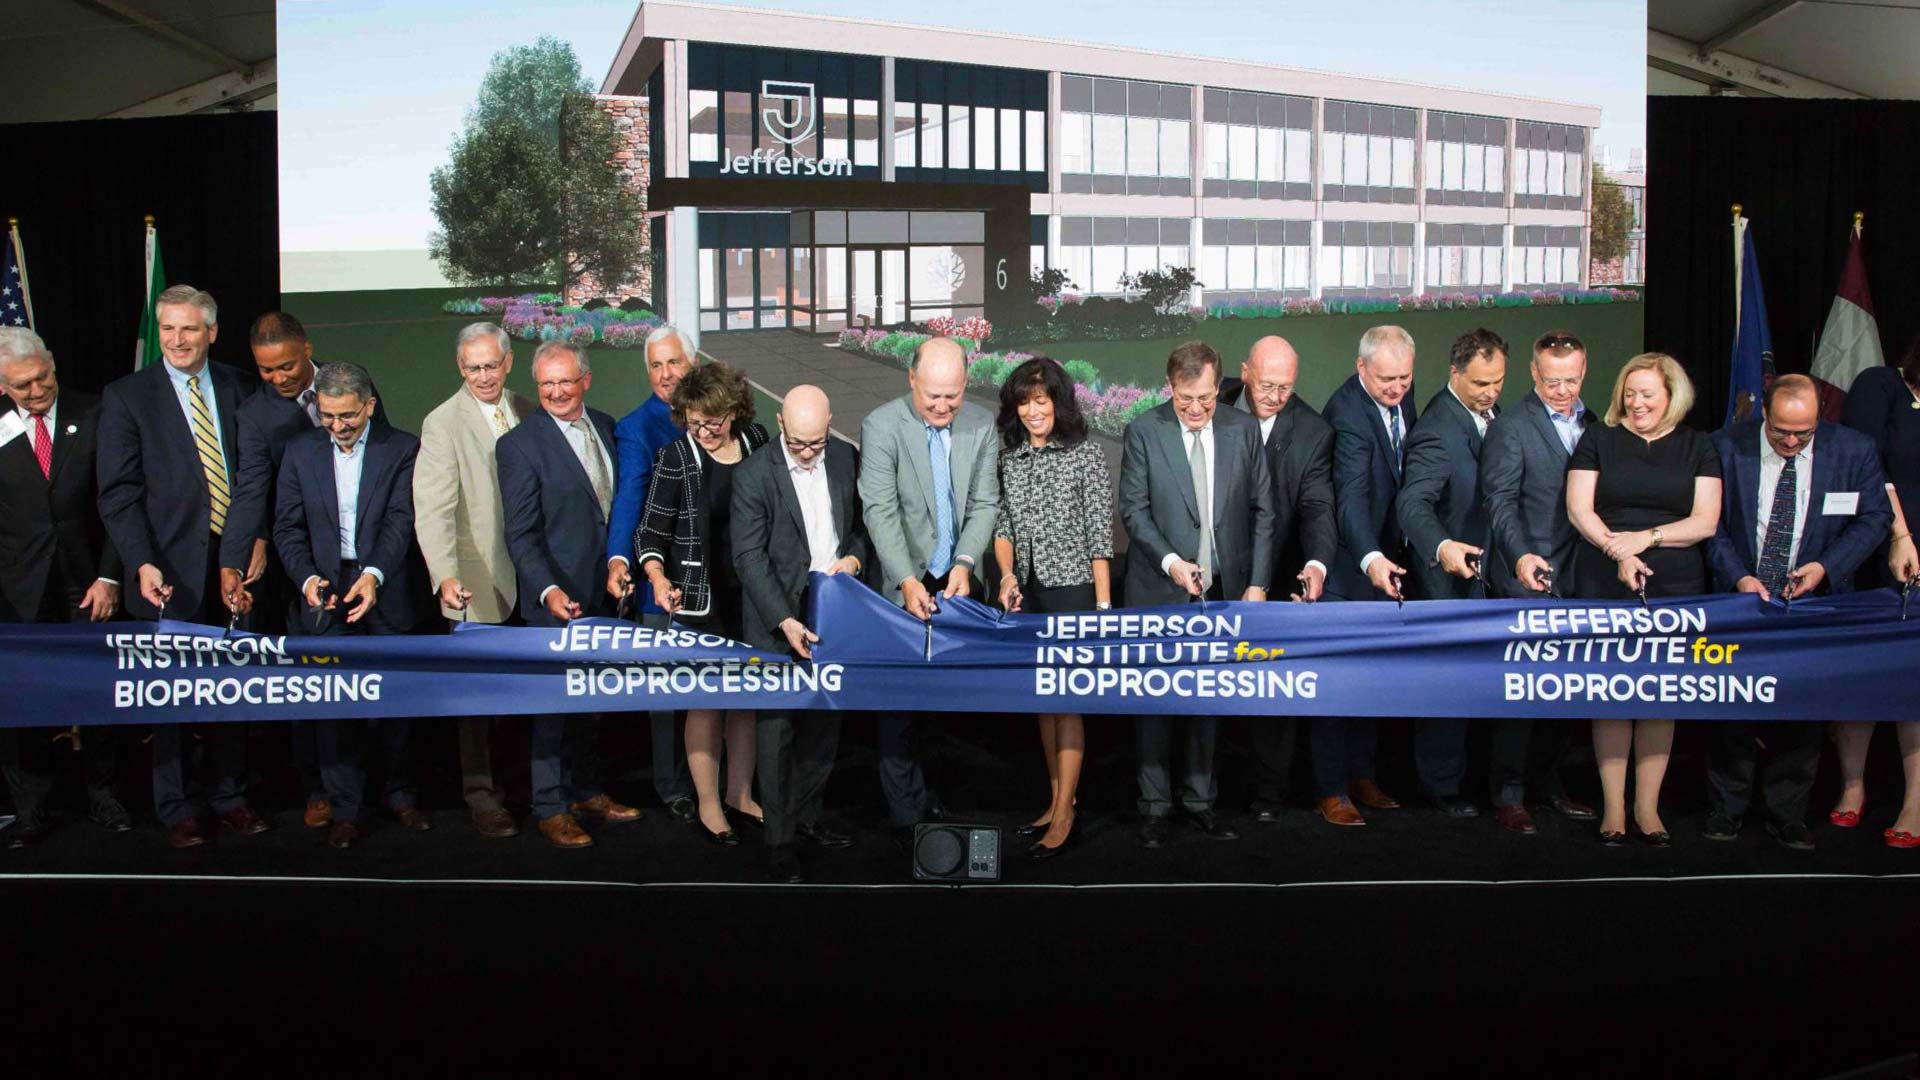 A group of people wearing formal business attire stand together with scissors in their hands as they cut a large blue ribbon in front of them that reads, “Jefferson Institute for Bioprocessing.”